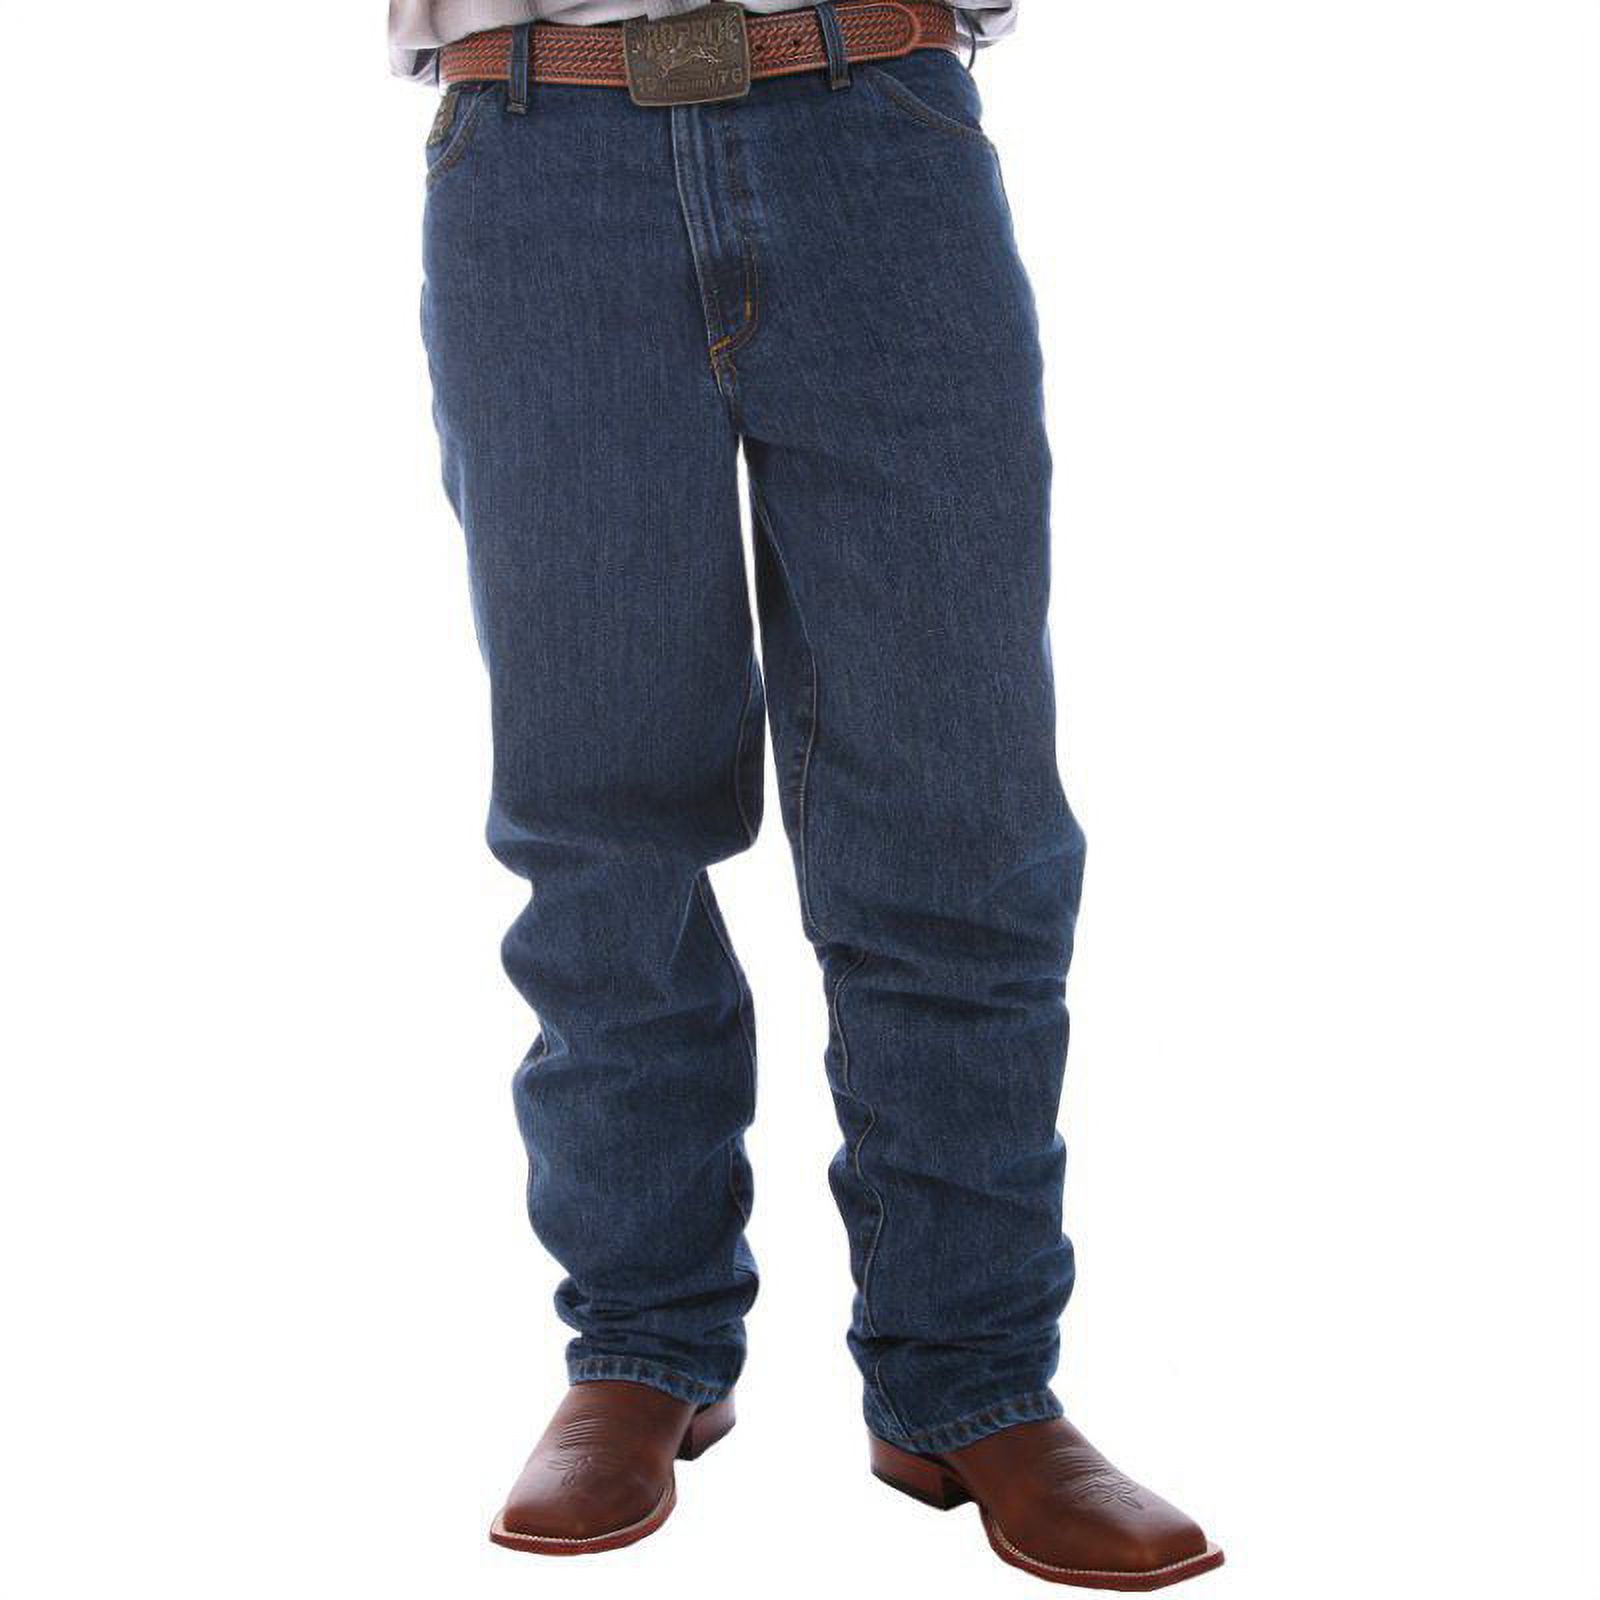 Cinch Men's Green Label Relaxed Fit Dark Stonewash Jeans Dark Stone 29W x 30L  US - image 2 of 4